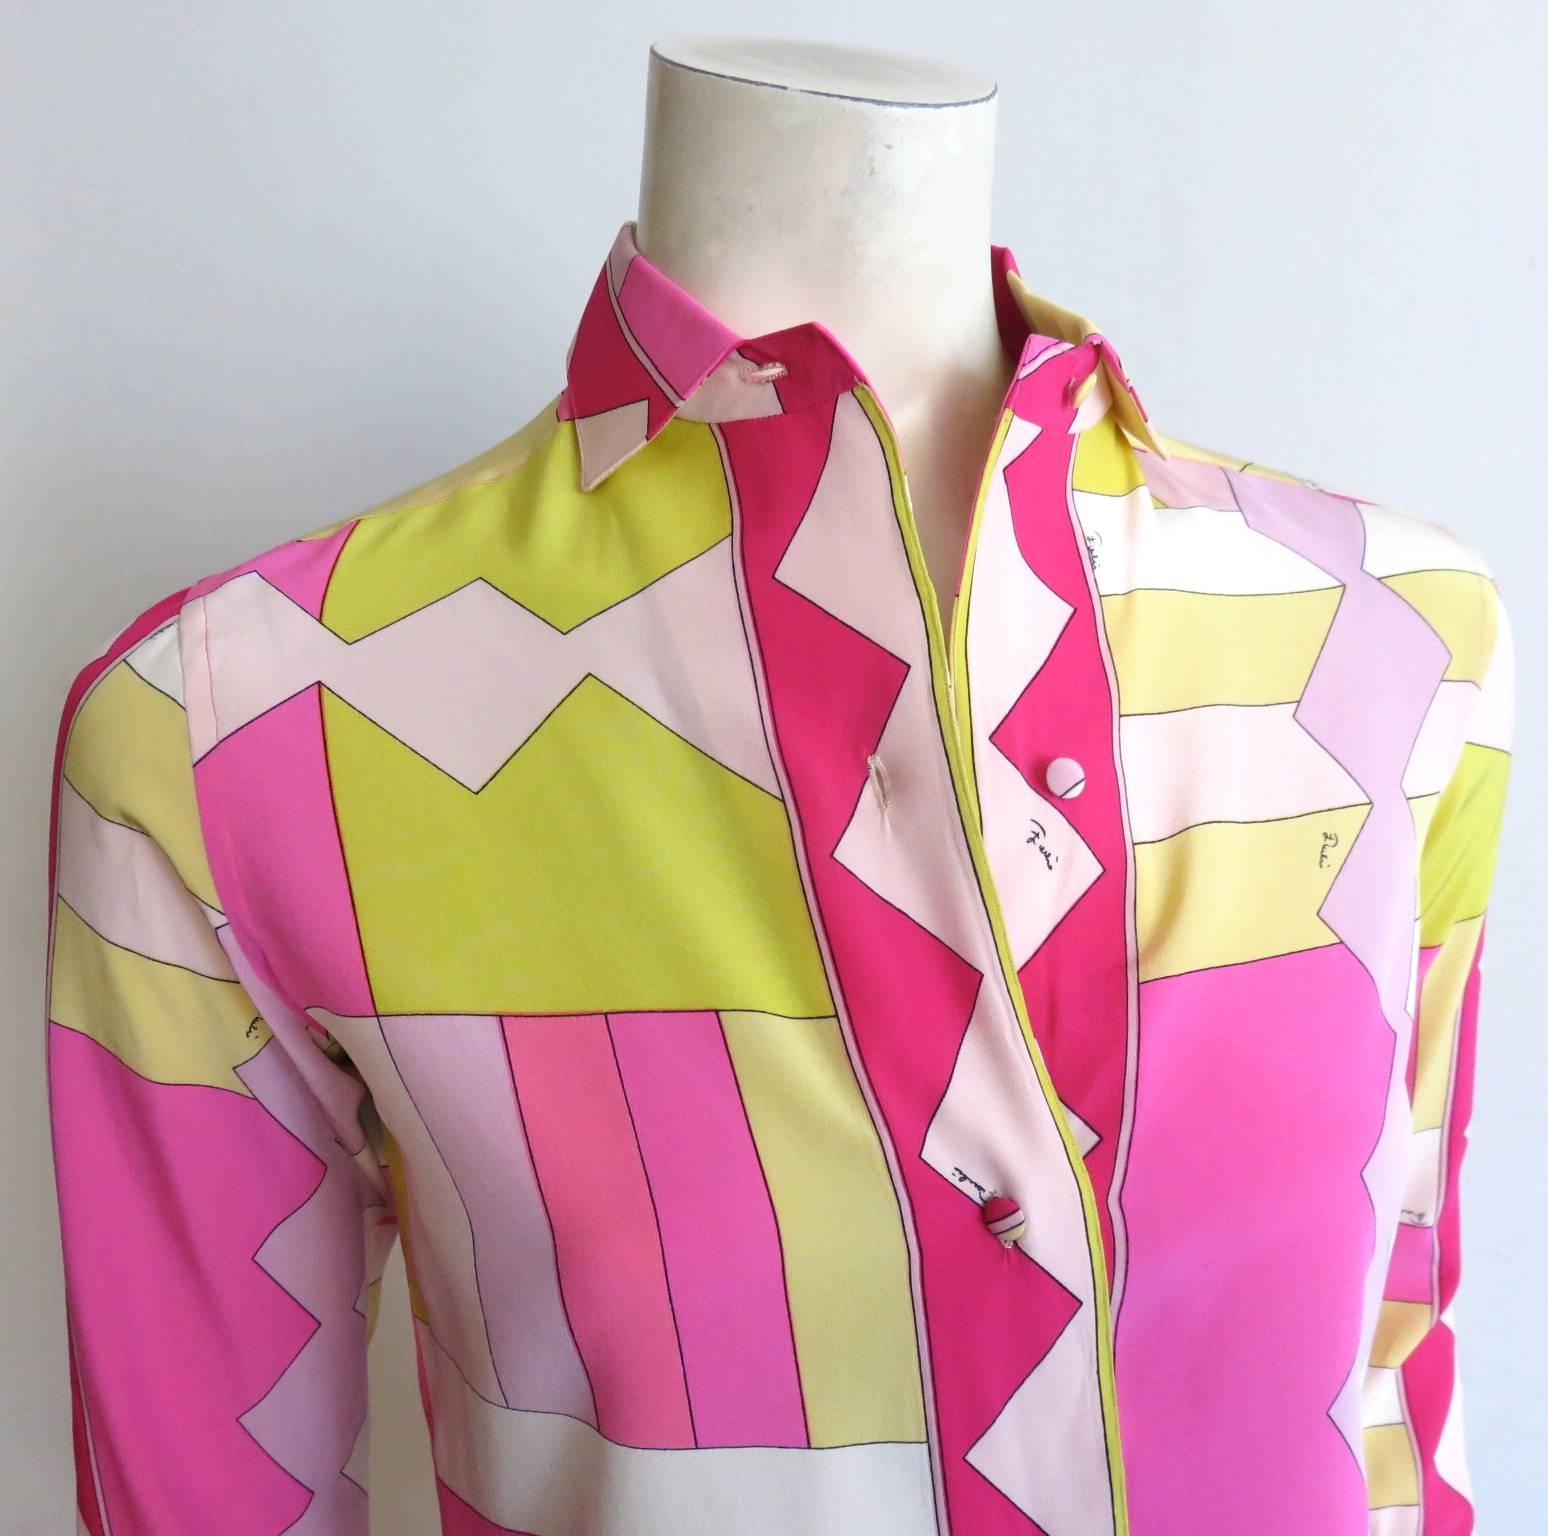 Excellent condition, 1960's EMILIO PUCCI Signature printed silk shirt in bright shades of pink, and yellow. 

Zig-zag printed collar, front placket, cuffs, and hem.

Self-fabric covered buttons.

*MEASUREMENTS*

Suits a modern-day US size